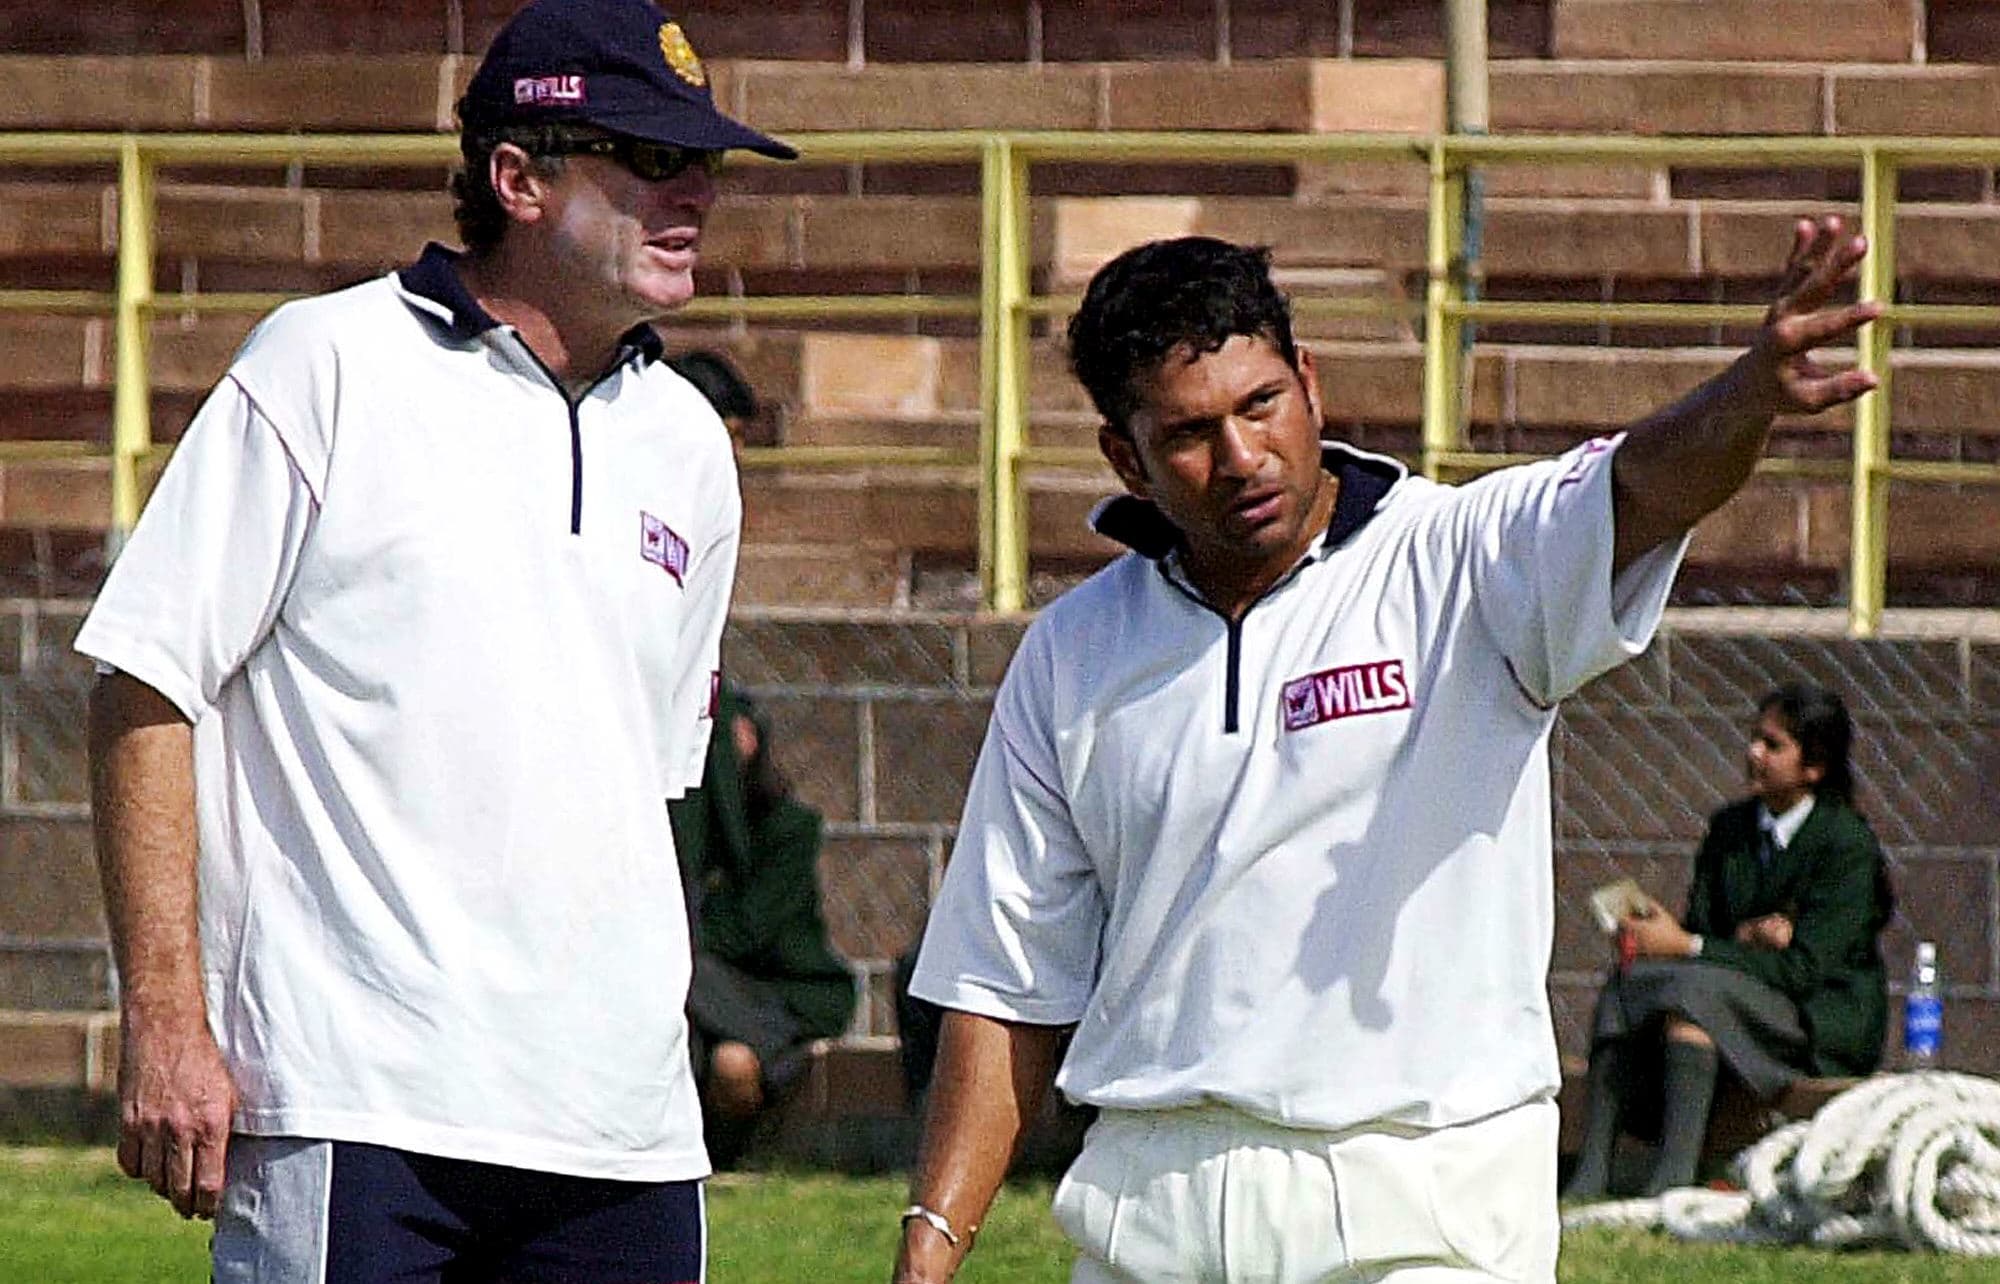 John Wright with Sachin Tendulkar in 2000. Tendulkar is considered as one of the greatest batsman to have graced the game.